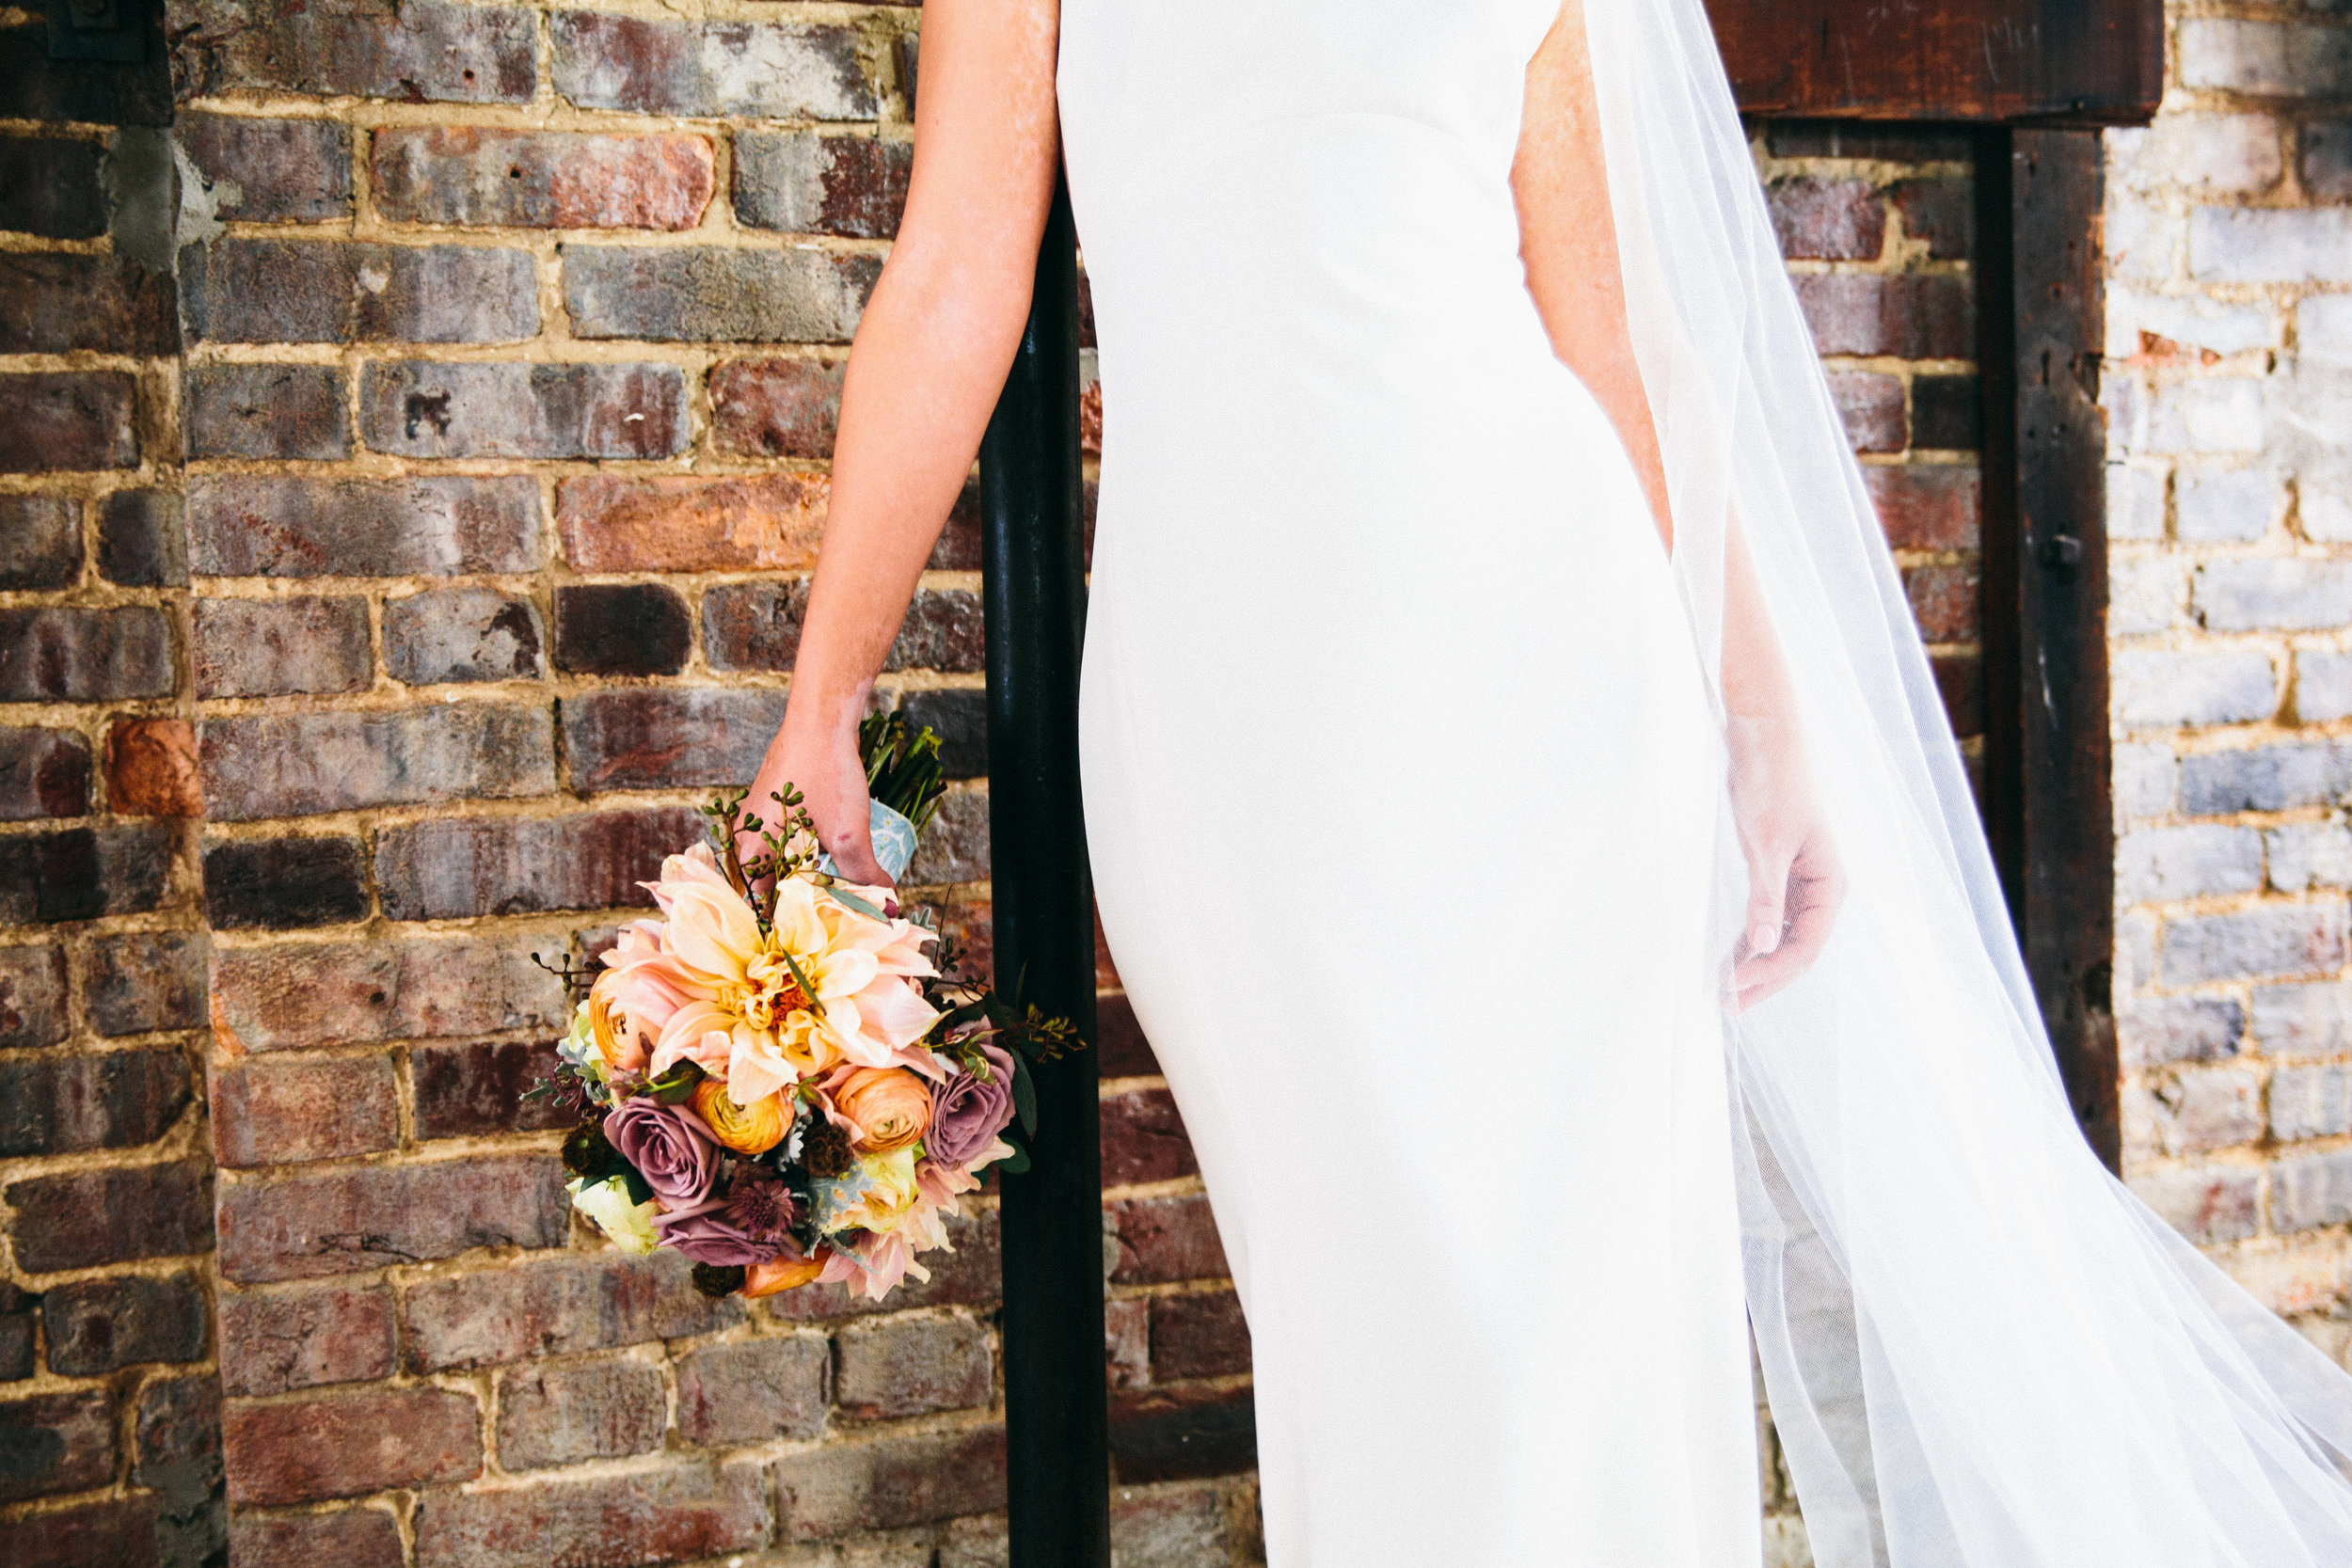 Cannery One Wedding // Mauve and coral wedding flowers // Nashville Floral Design